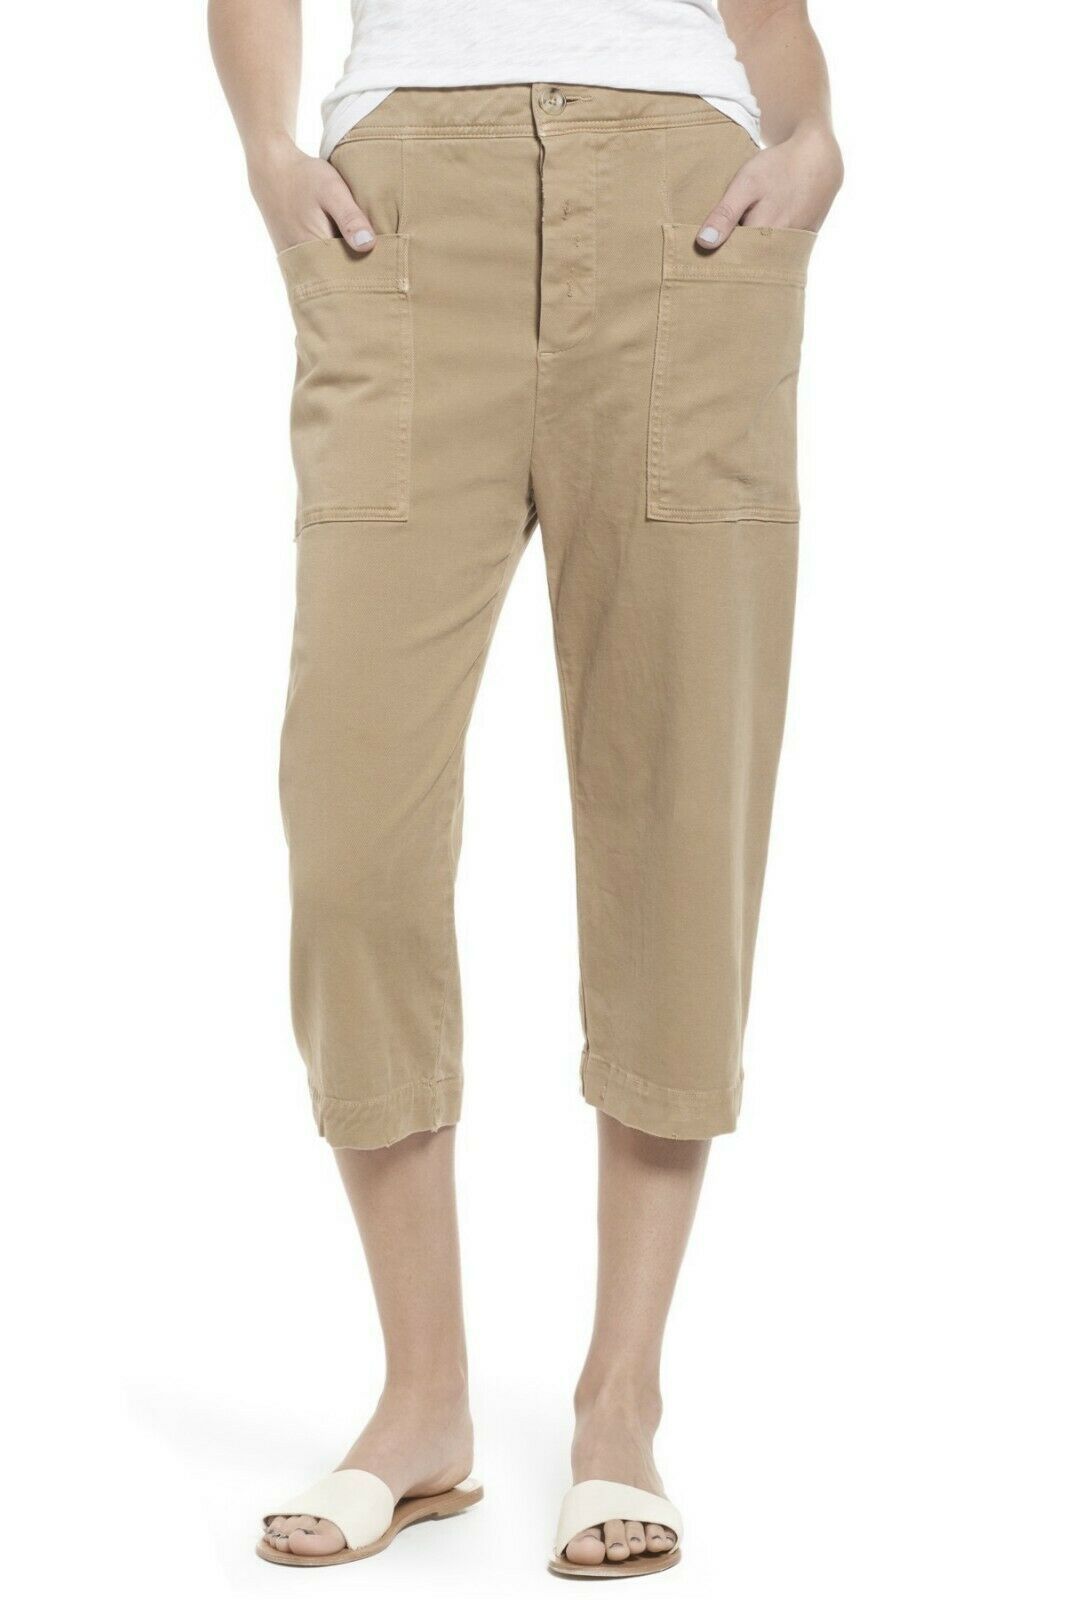 Primary image for NWT JAMES PERSE 27 4 cropped cargo pants tan khaki soft cotton twill $225 comfy